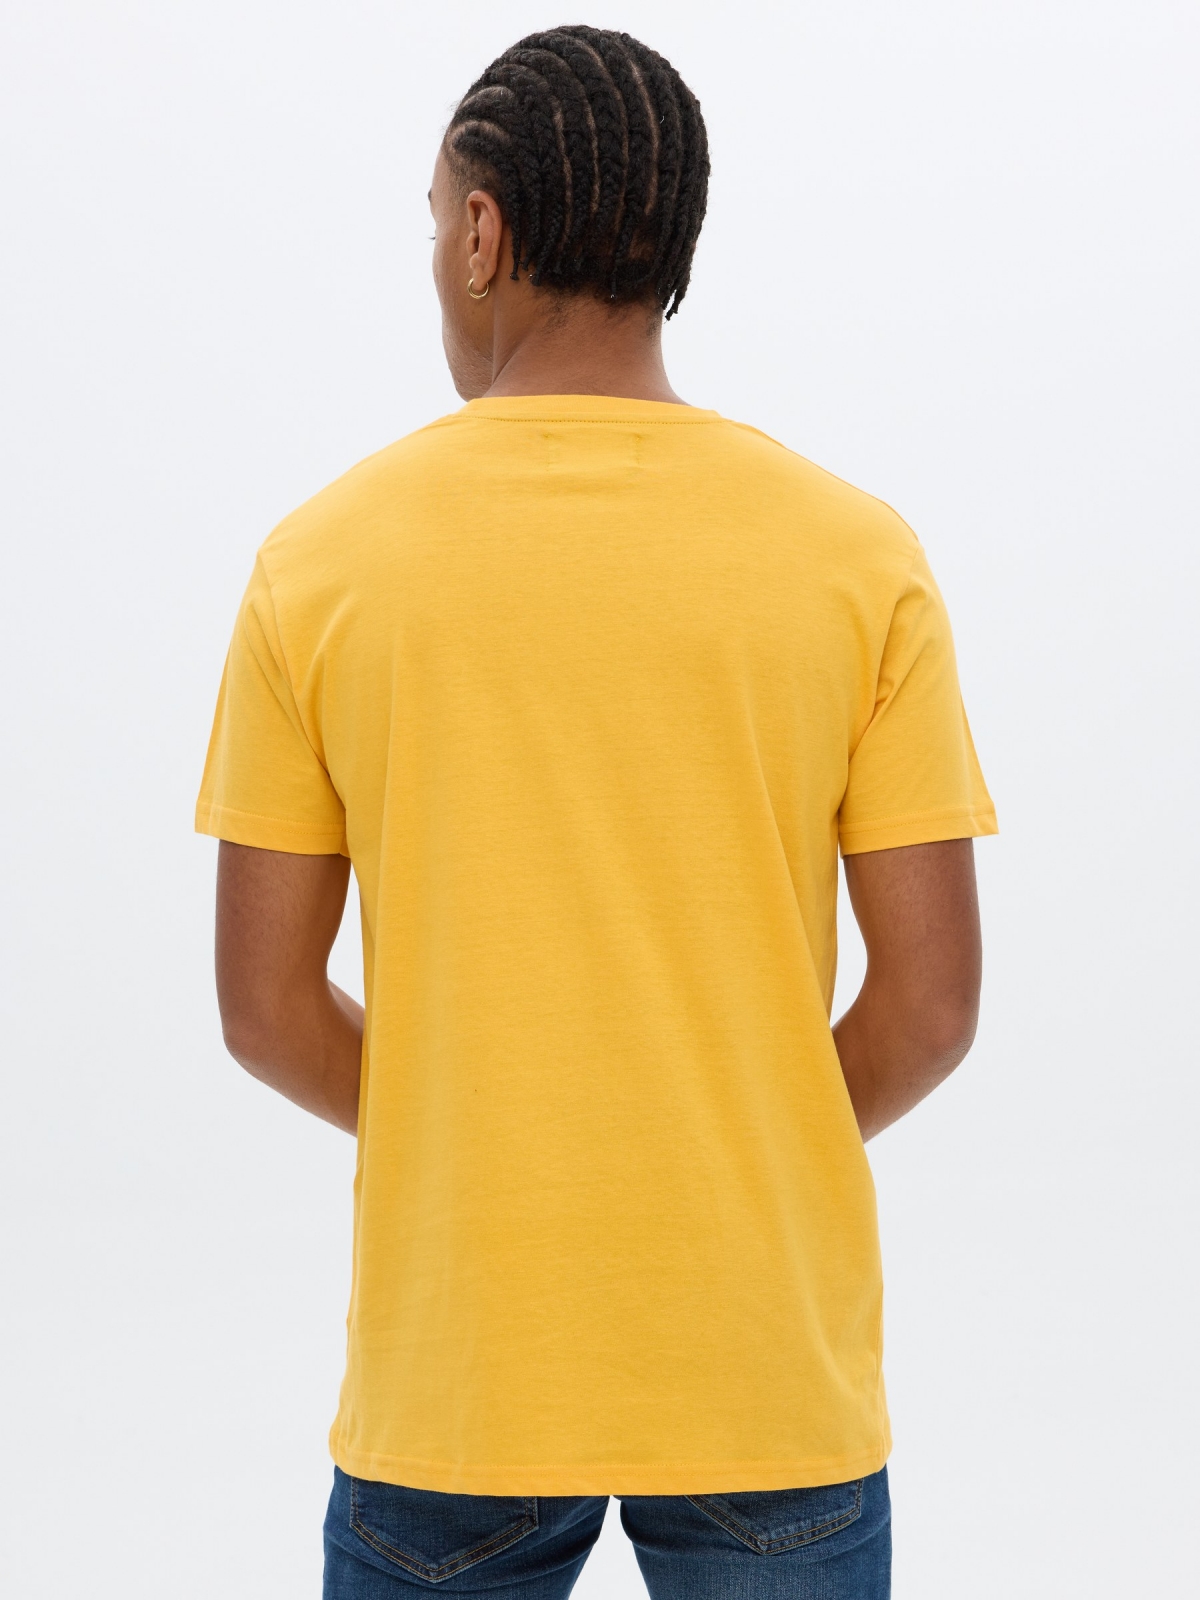 T-shirt printed inside pastel yellow middle back view